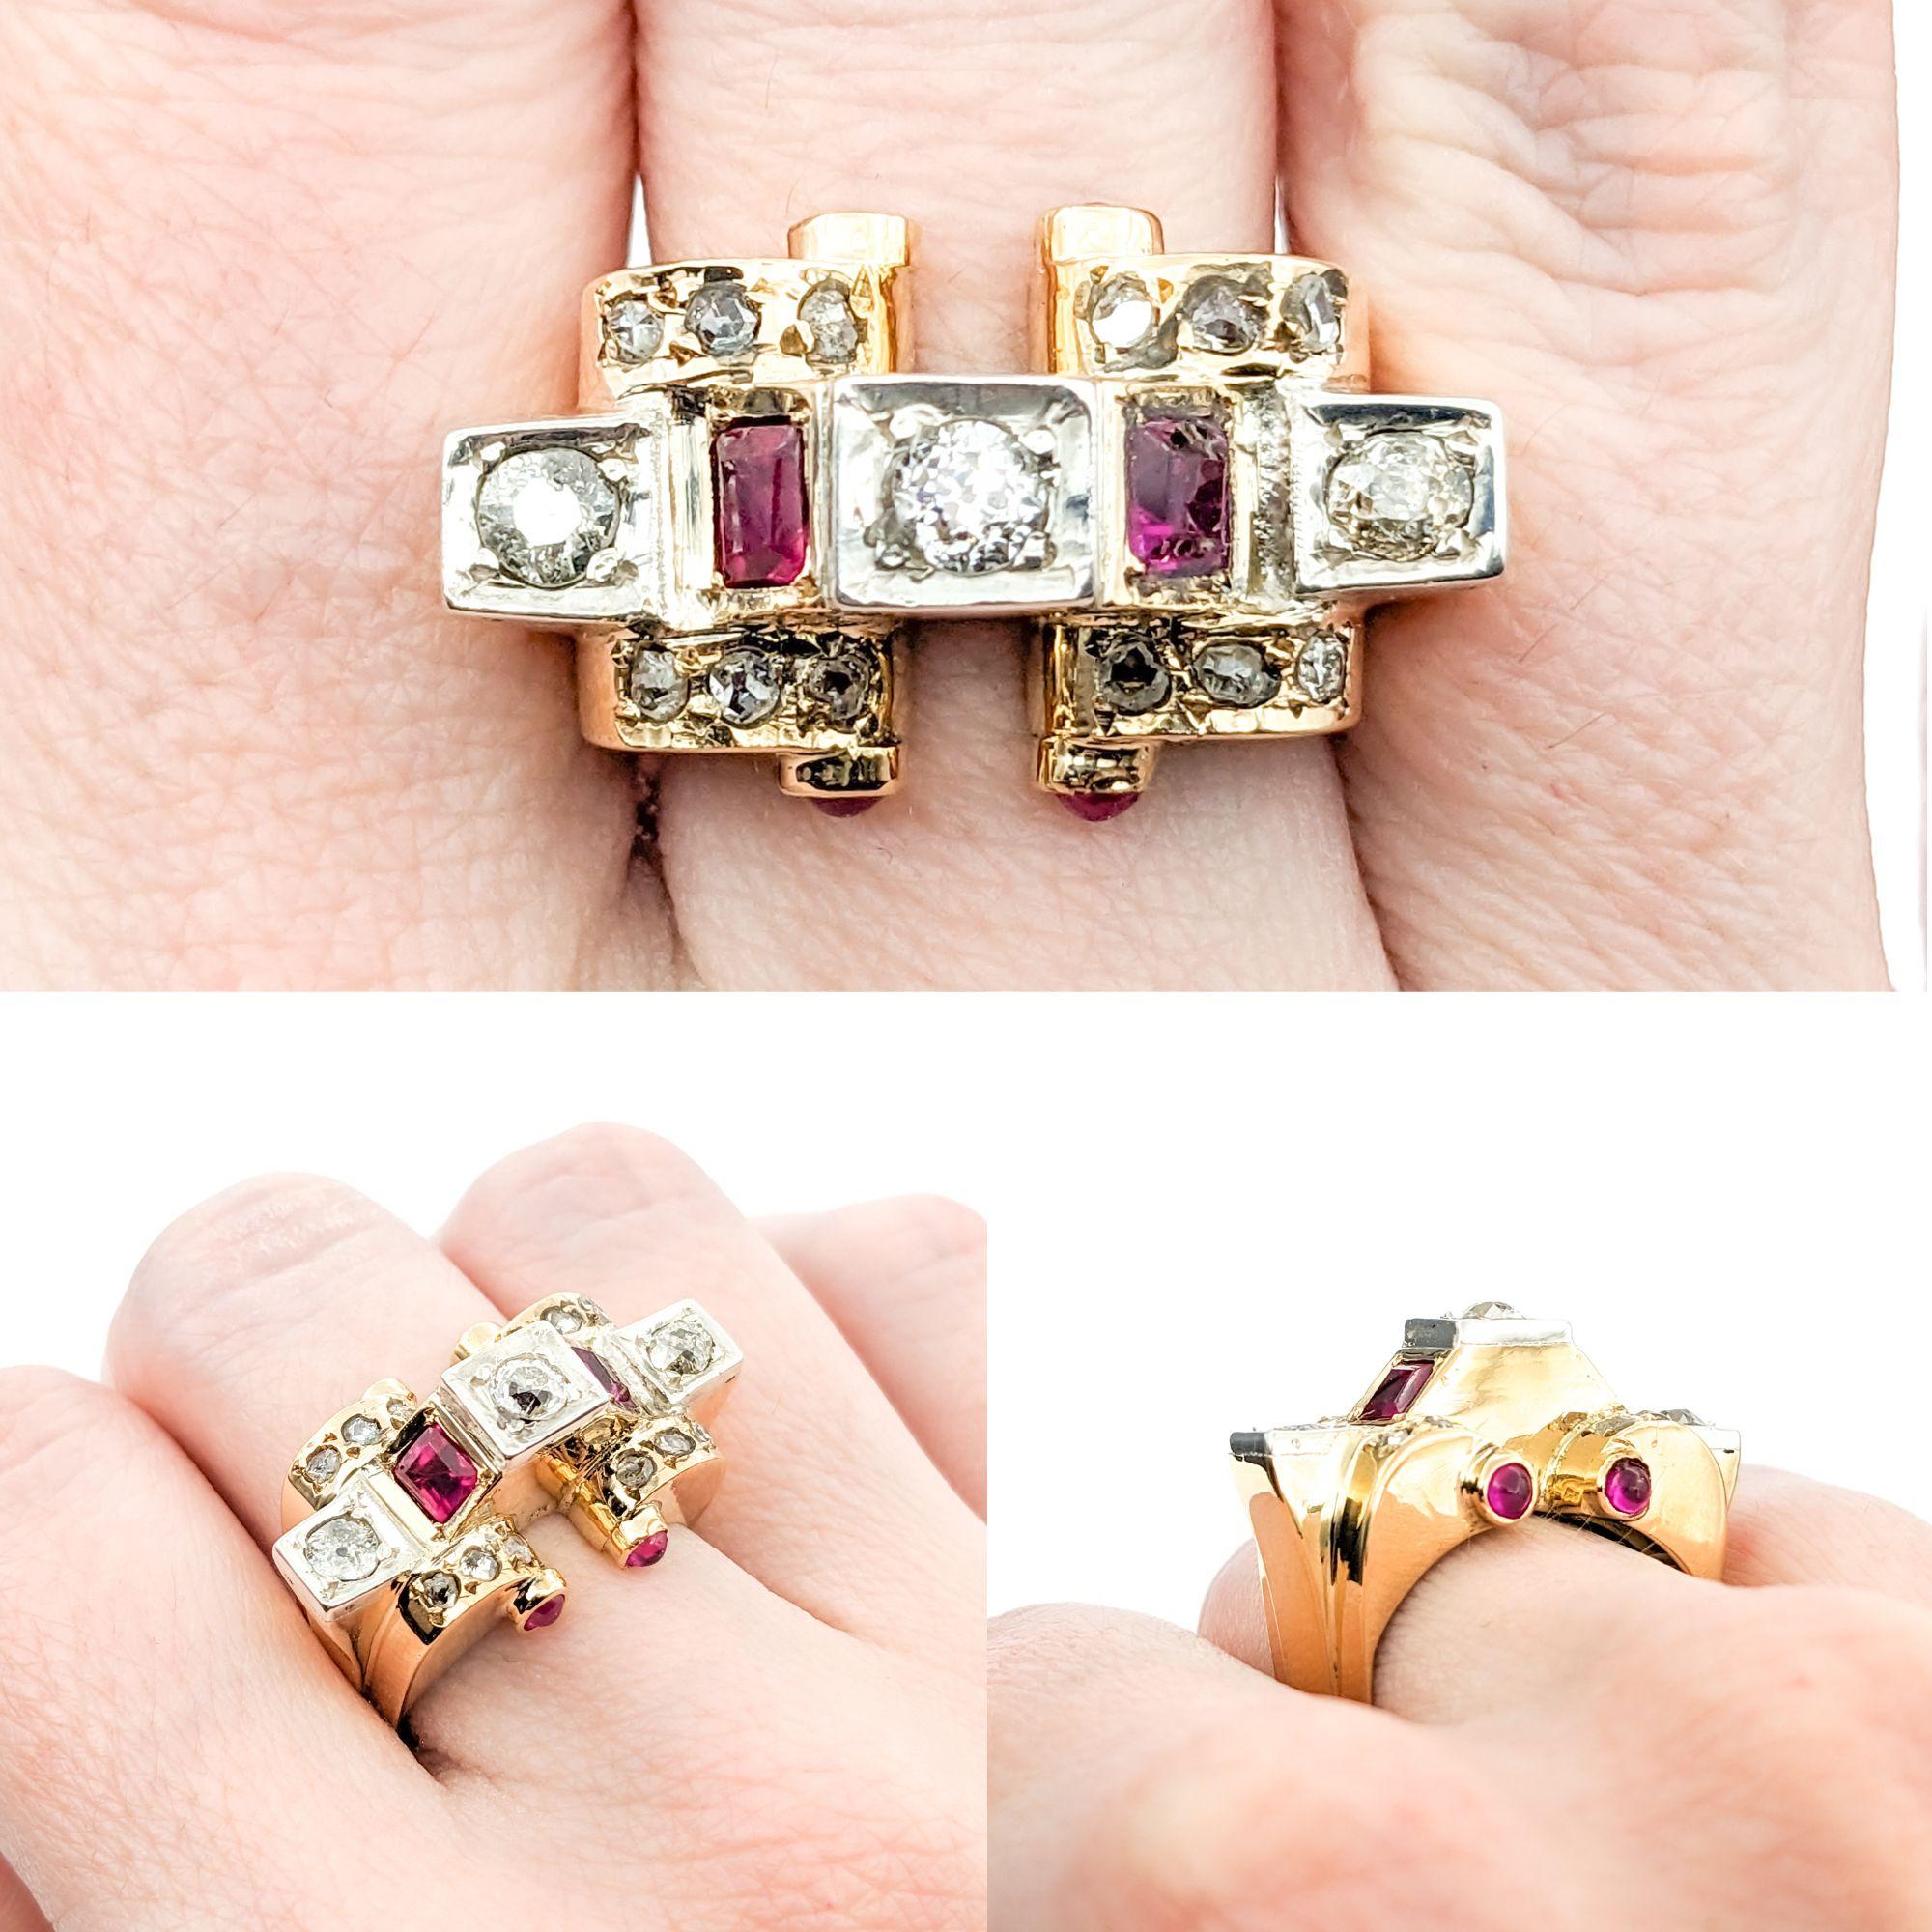 .75ctw Old Mine Cut Diamonds & Ruby Ring In Yellow

This magnificent Antique Ring Victorian is meticulously crafted in 14kt yellow gold, showcasing a .75ctw Old Mine Cut Diamonds centerpiece, accented by Synthetic Rubies. The diamonds boast an I